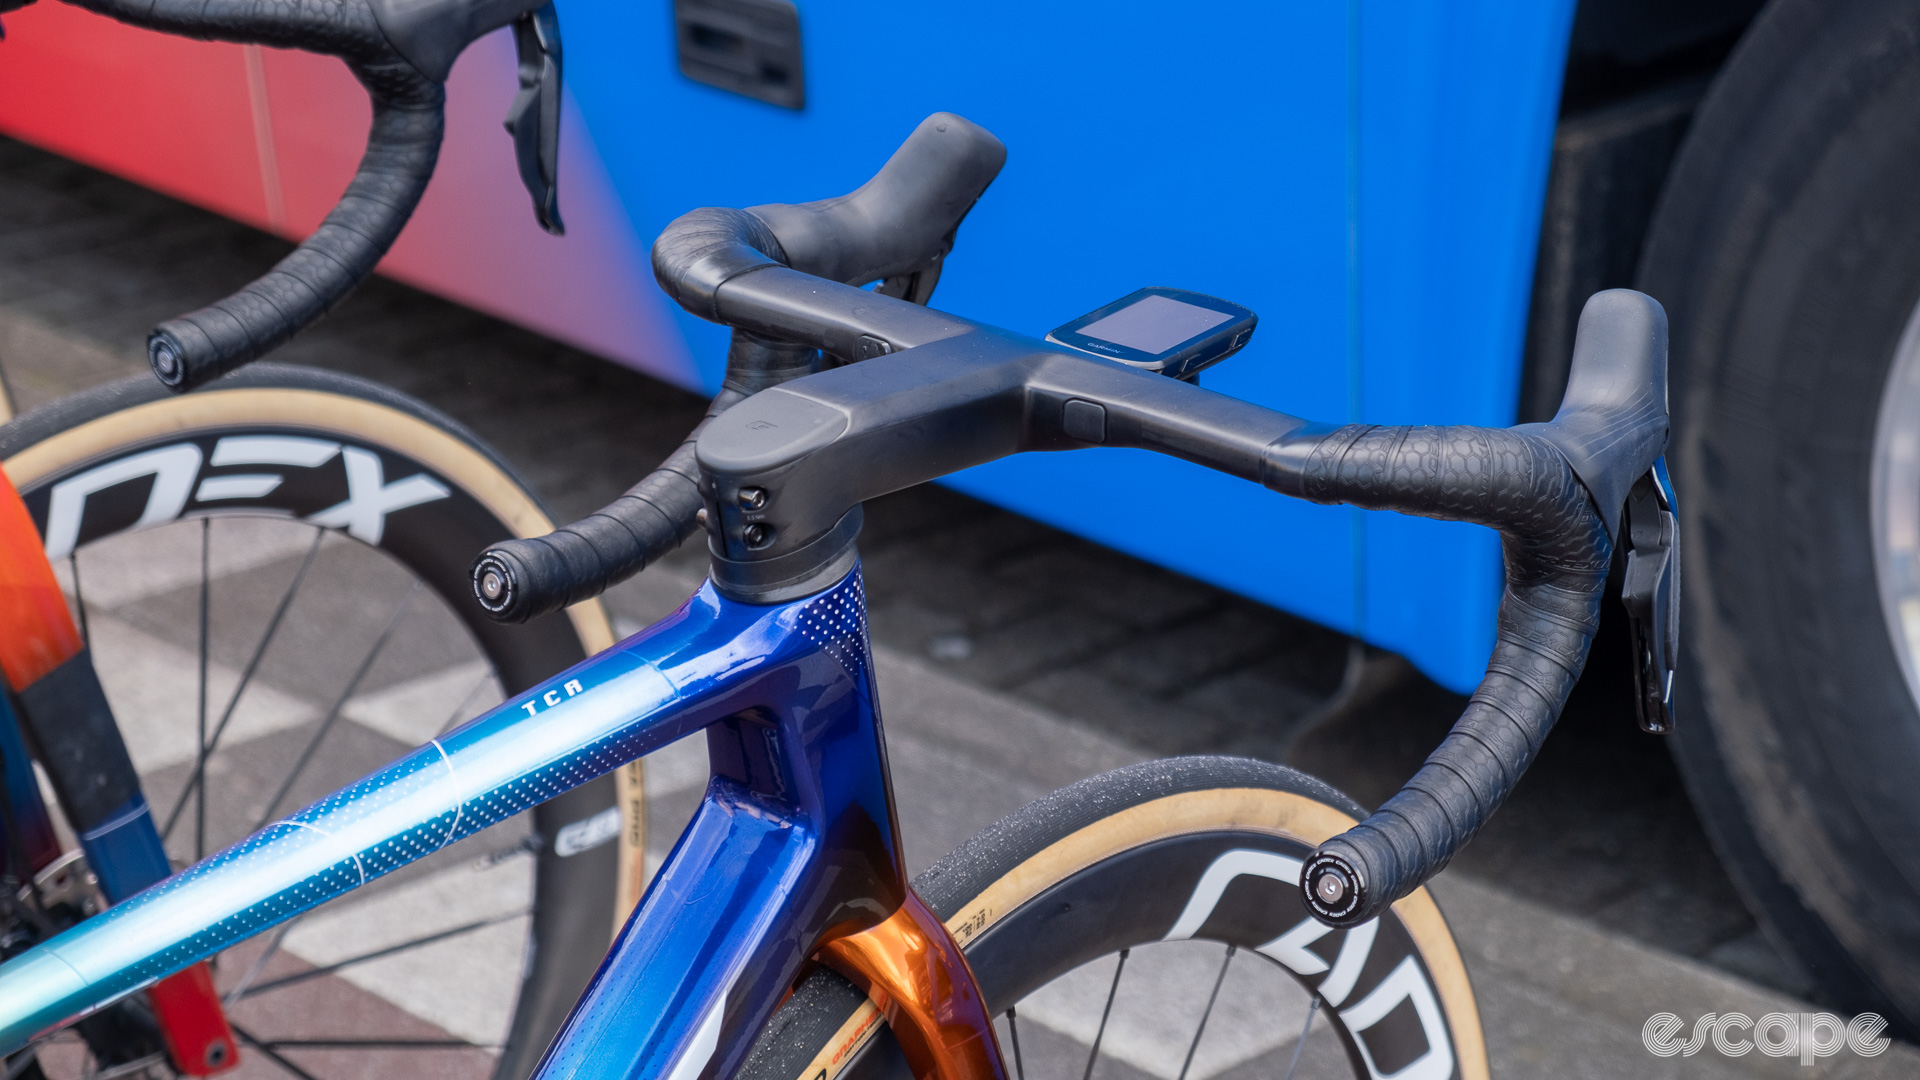 The image shows a view of Matthews' handlebars from behind. 